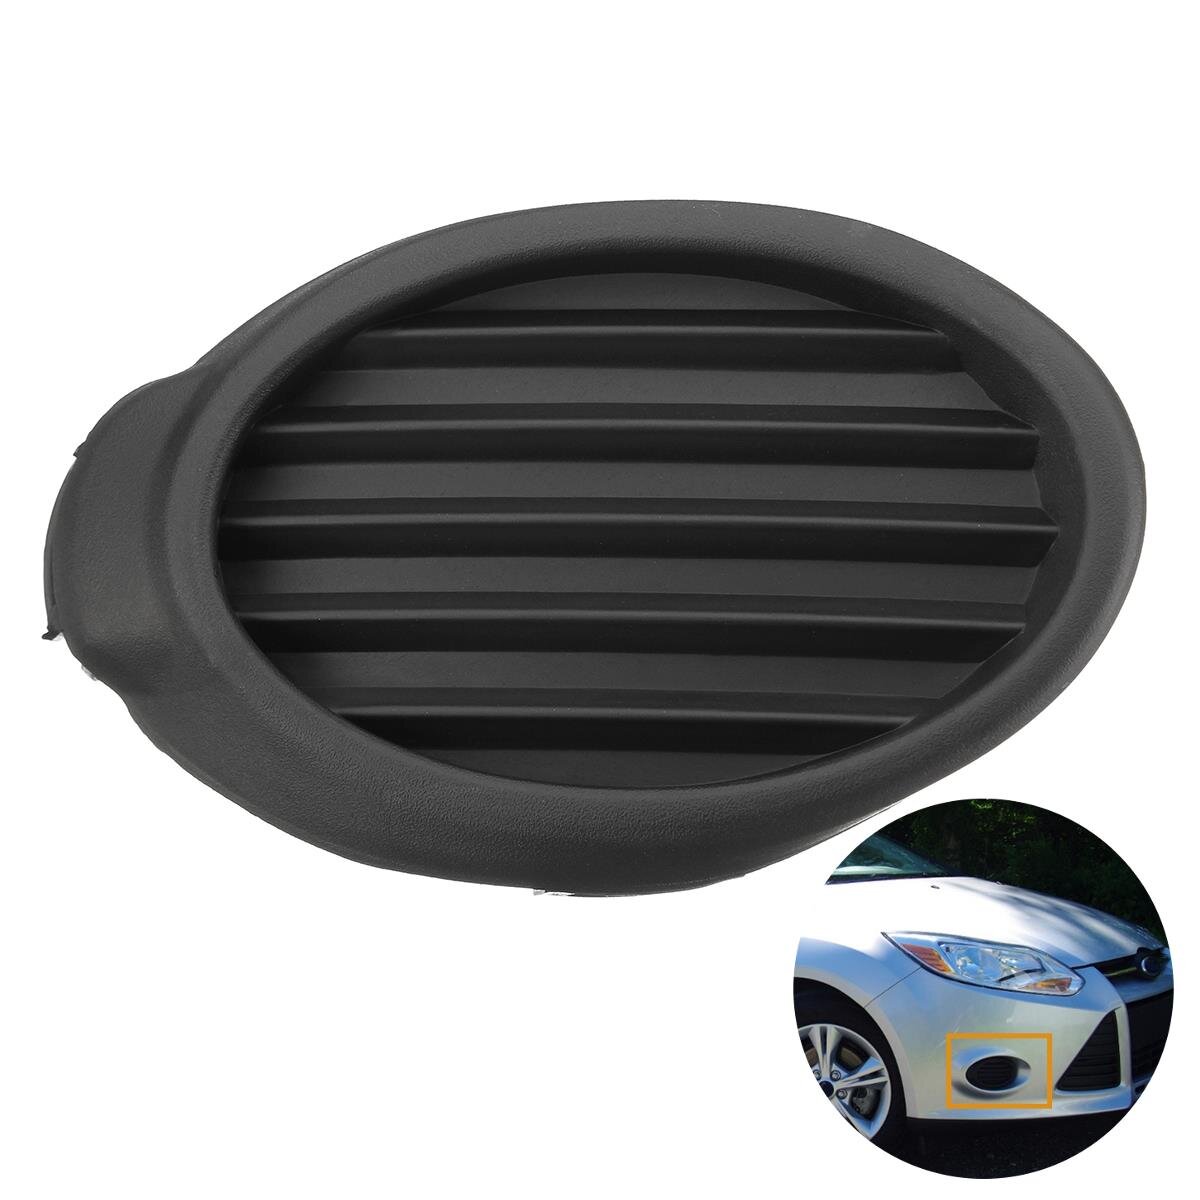 New Front Right RH Fog Light Lamp Cover Vent Grille Bezels for Ford Focus 2012-2014